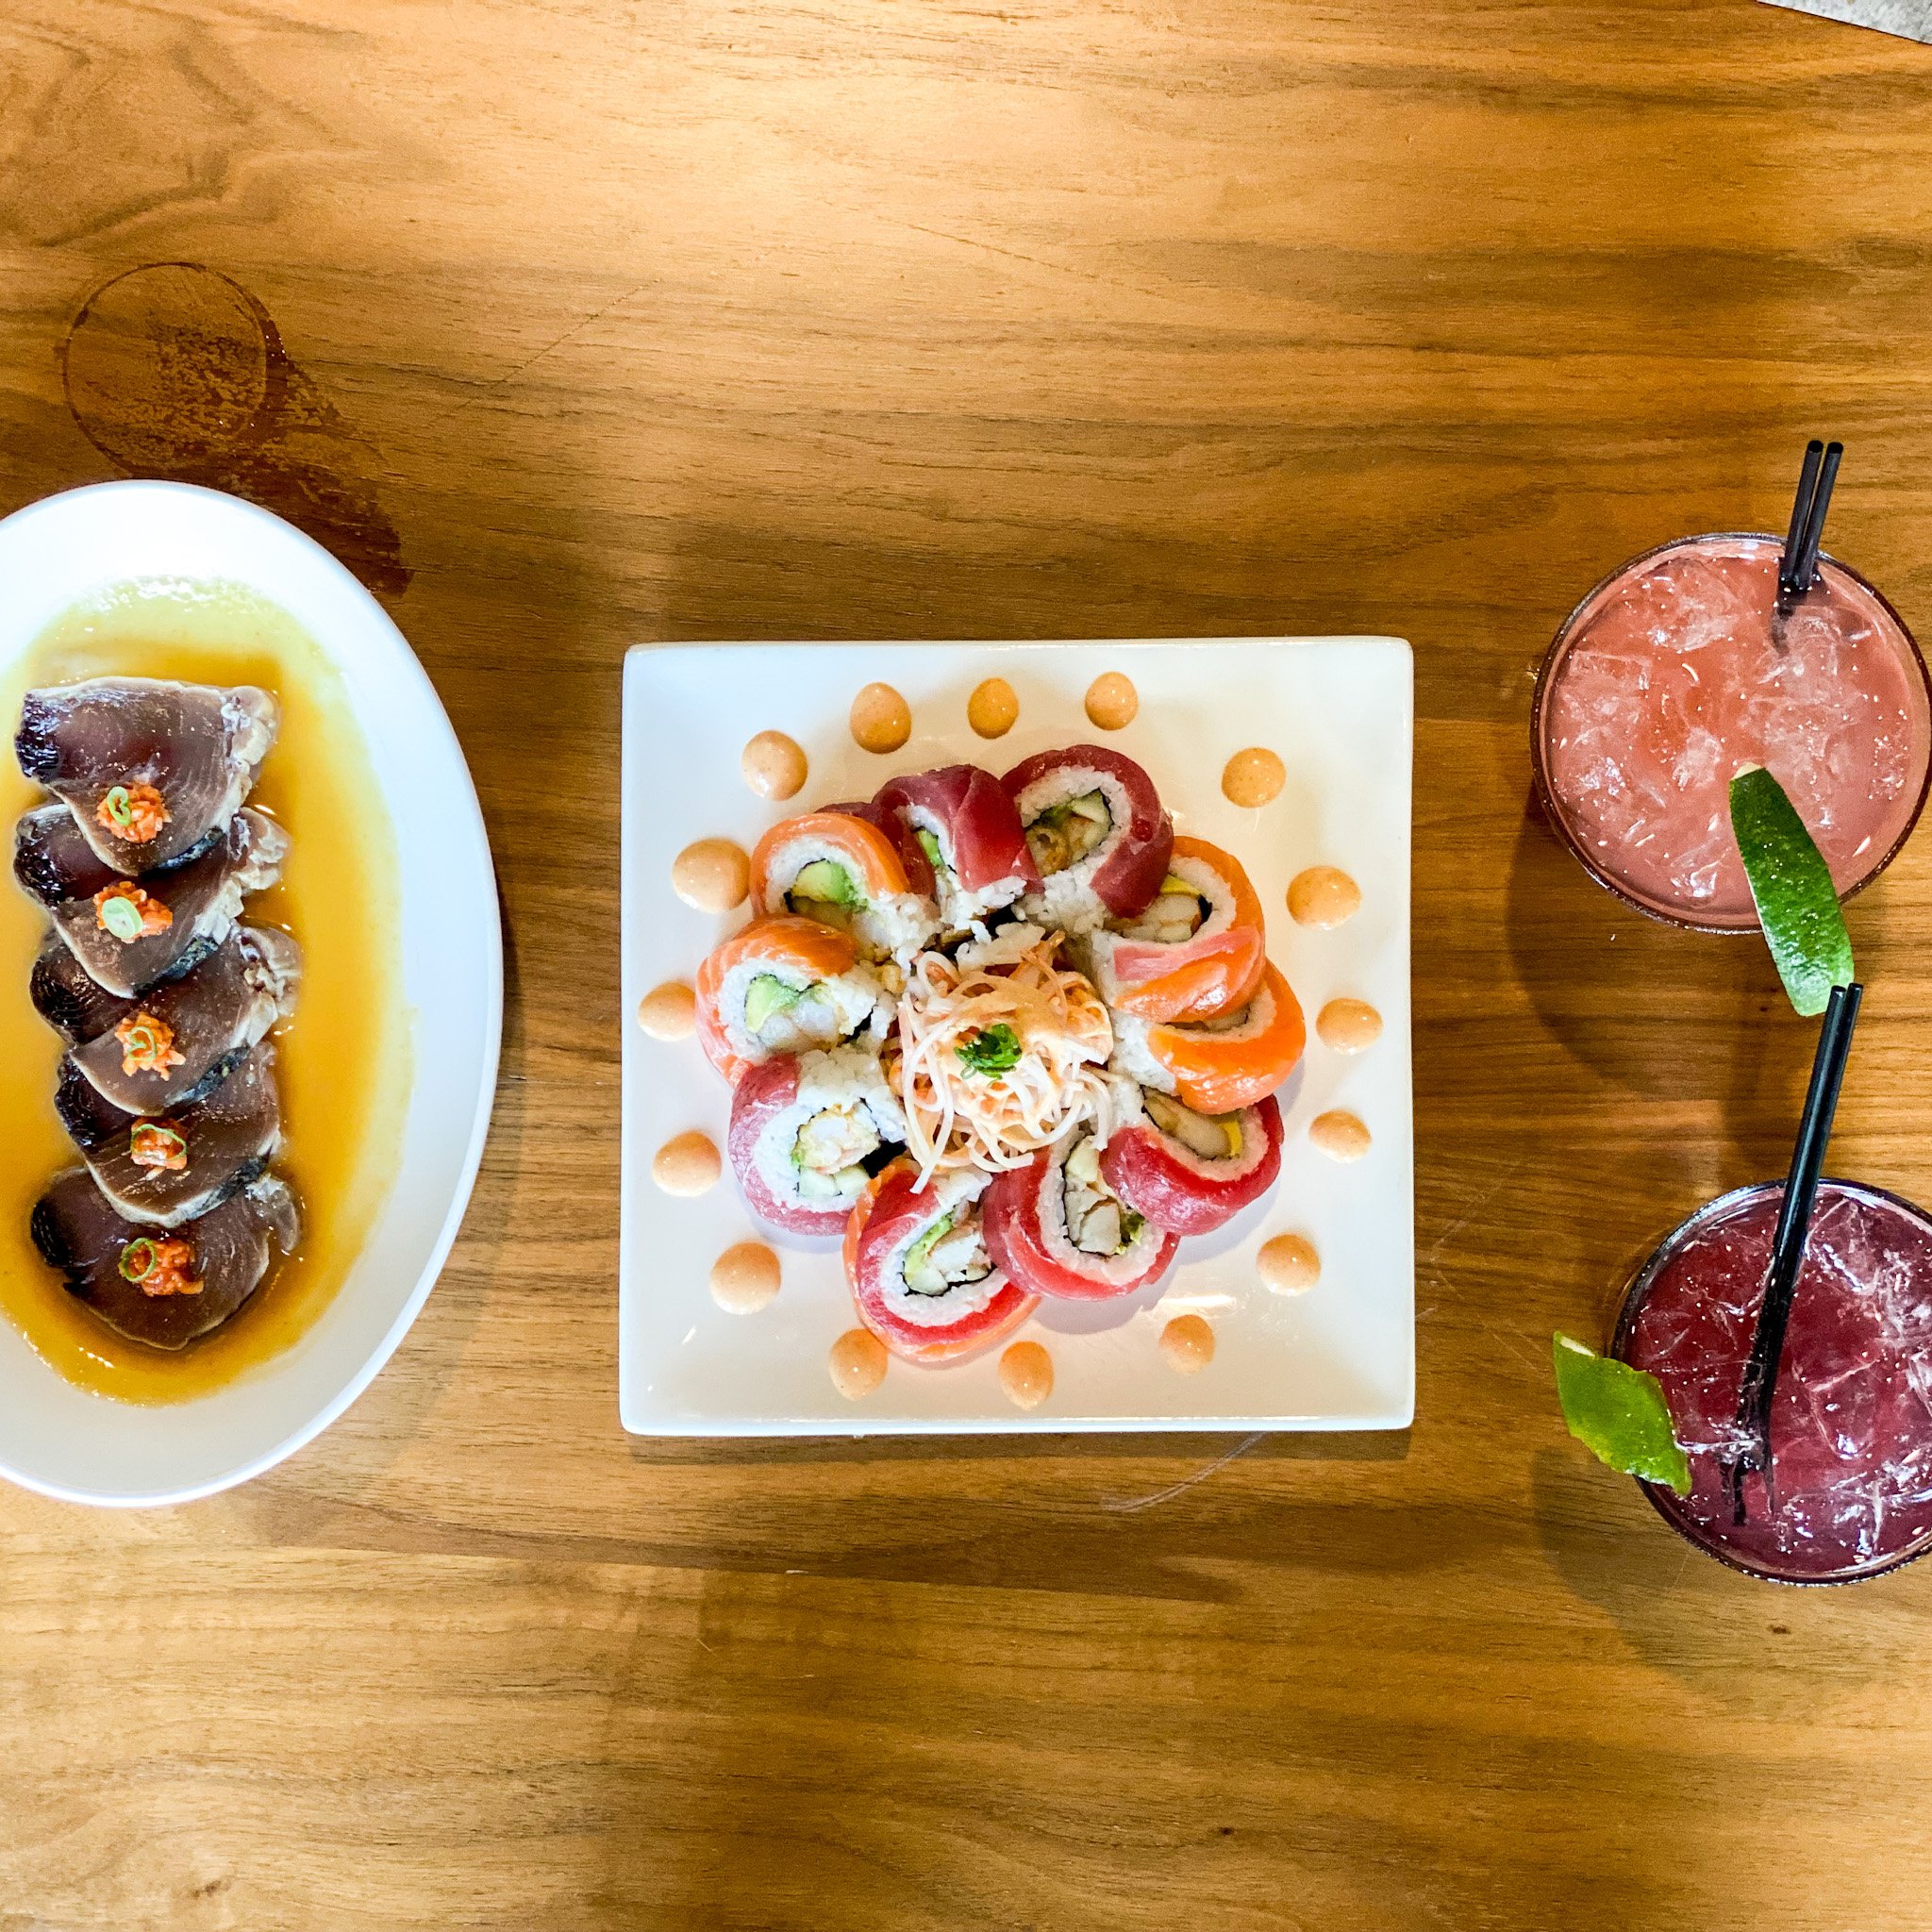 Suns out ☀️ and specials 🍣 are rocking! Come to the Hill and soak in the sunny vibes this week. #tulsafoodie #tulsaeats #southtulsa 

Check out our specials for the week by visiting 👉🏼 intherawsushi.com/on-the-hill